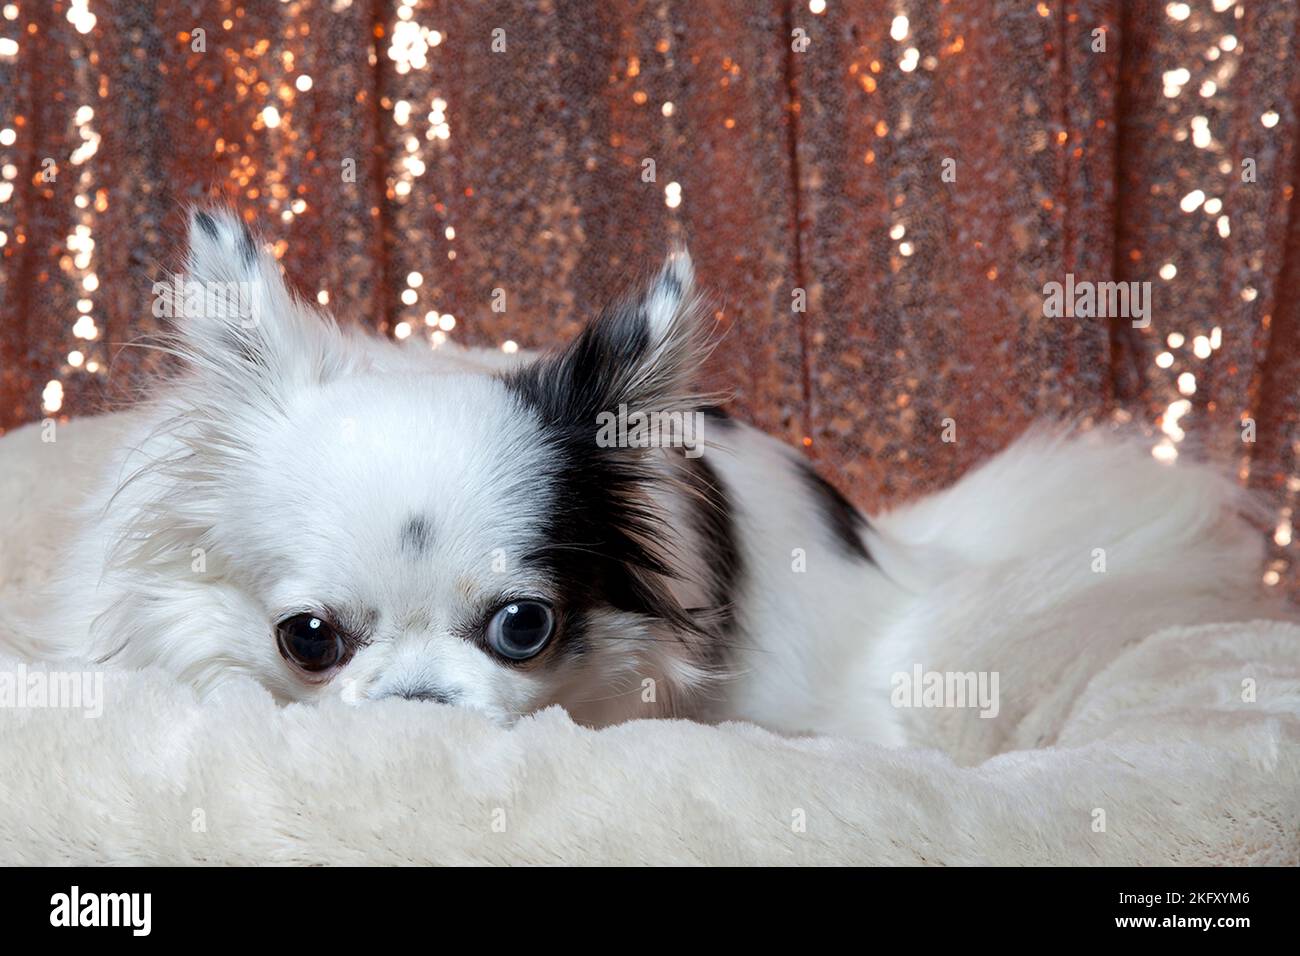 Black and white long hair chihuahua posing in a white furry bed against rose gold sequins drapes. Studio portrait of a small dog in front of a bright Stock Photo